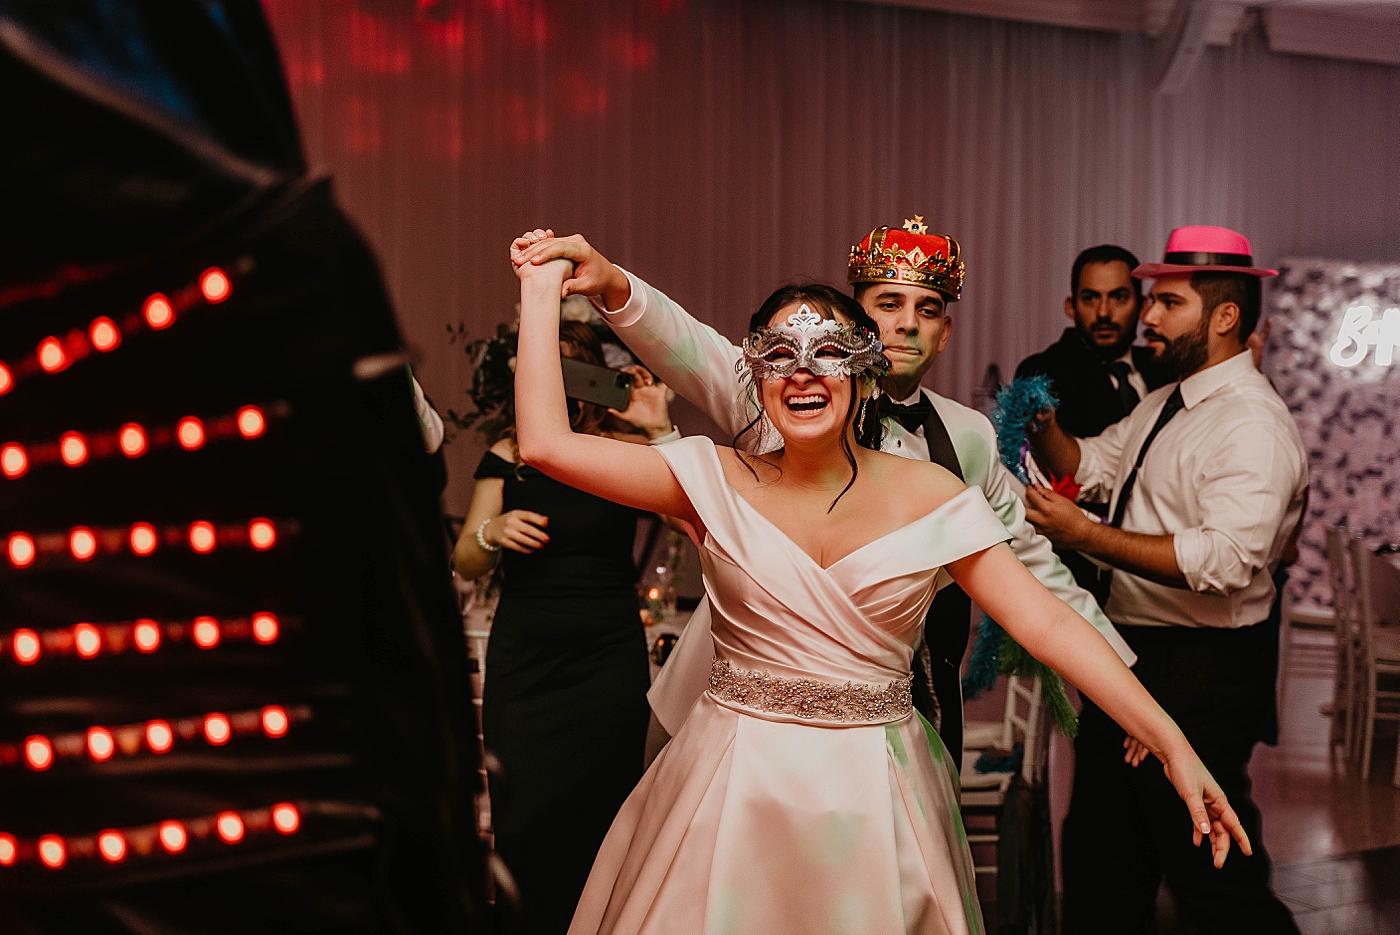 Bride and Groom dancing with fun costume decor Lavan Venue Wedding Photography captured by South Florida Wedding Photographer Krystal Capone Photography